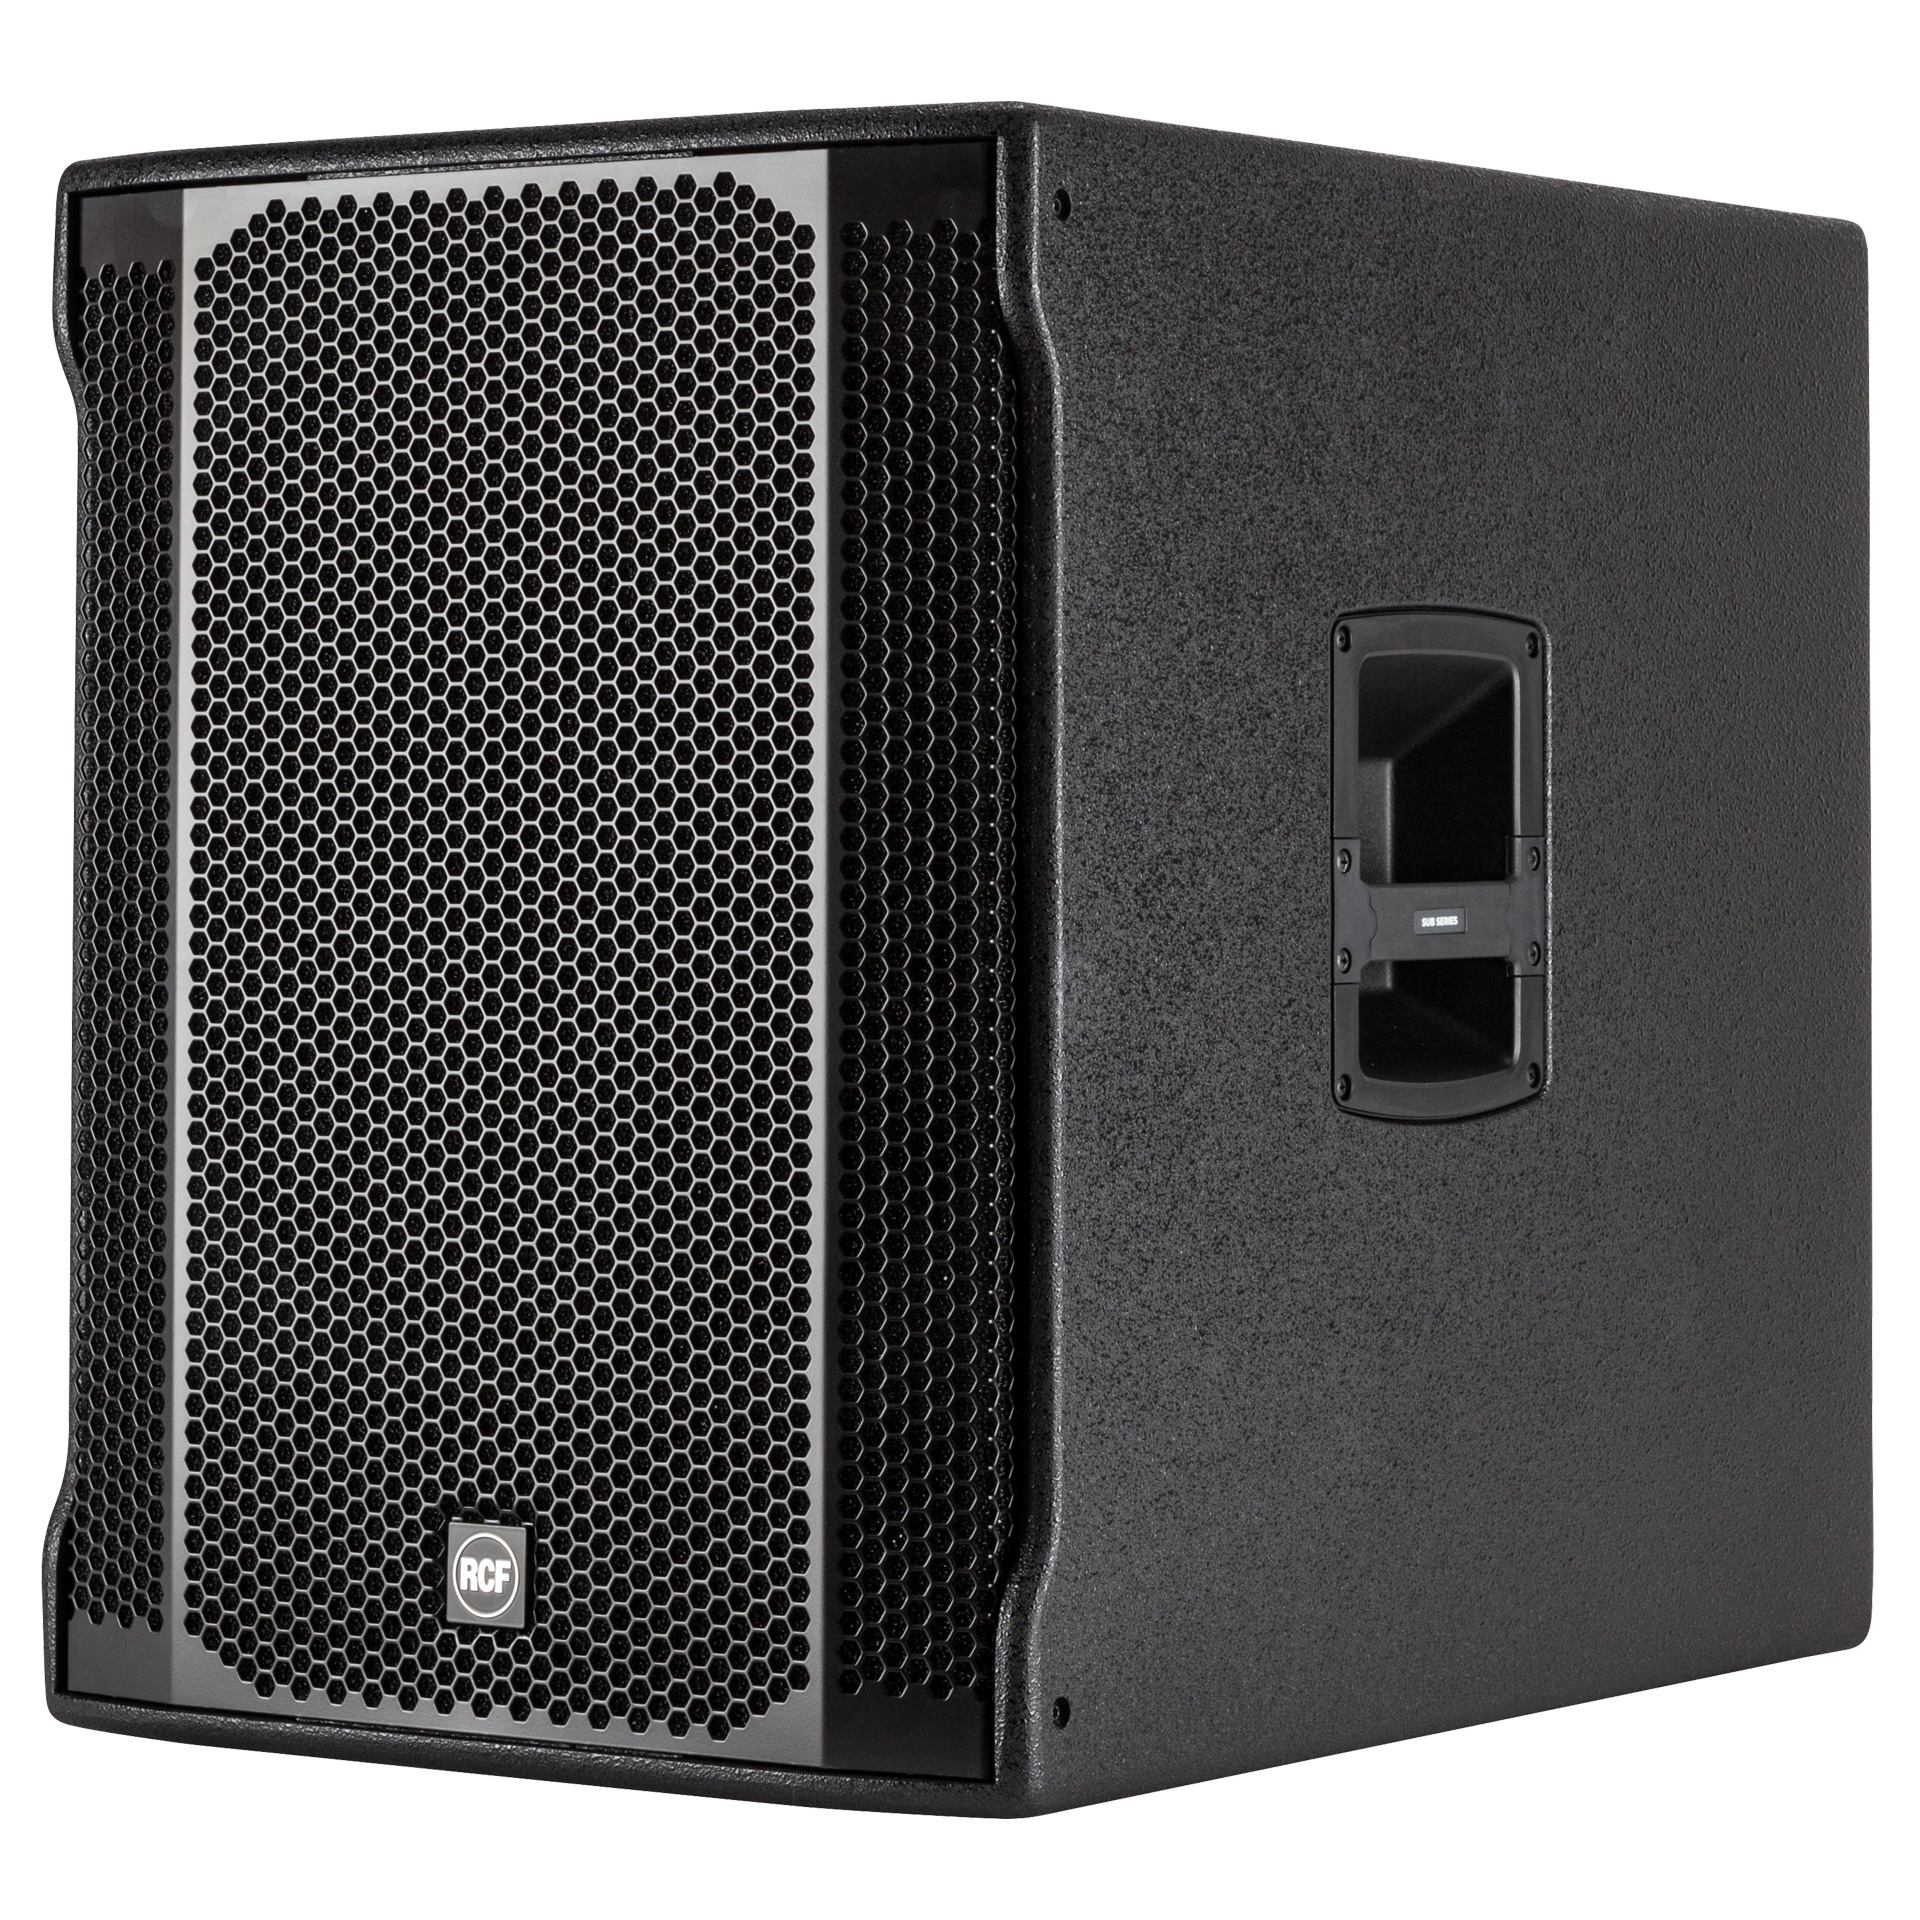 Rcf Sub 708-as Ii - Active subwoofer - Variation 1